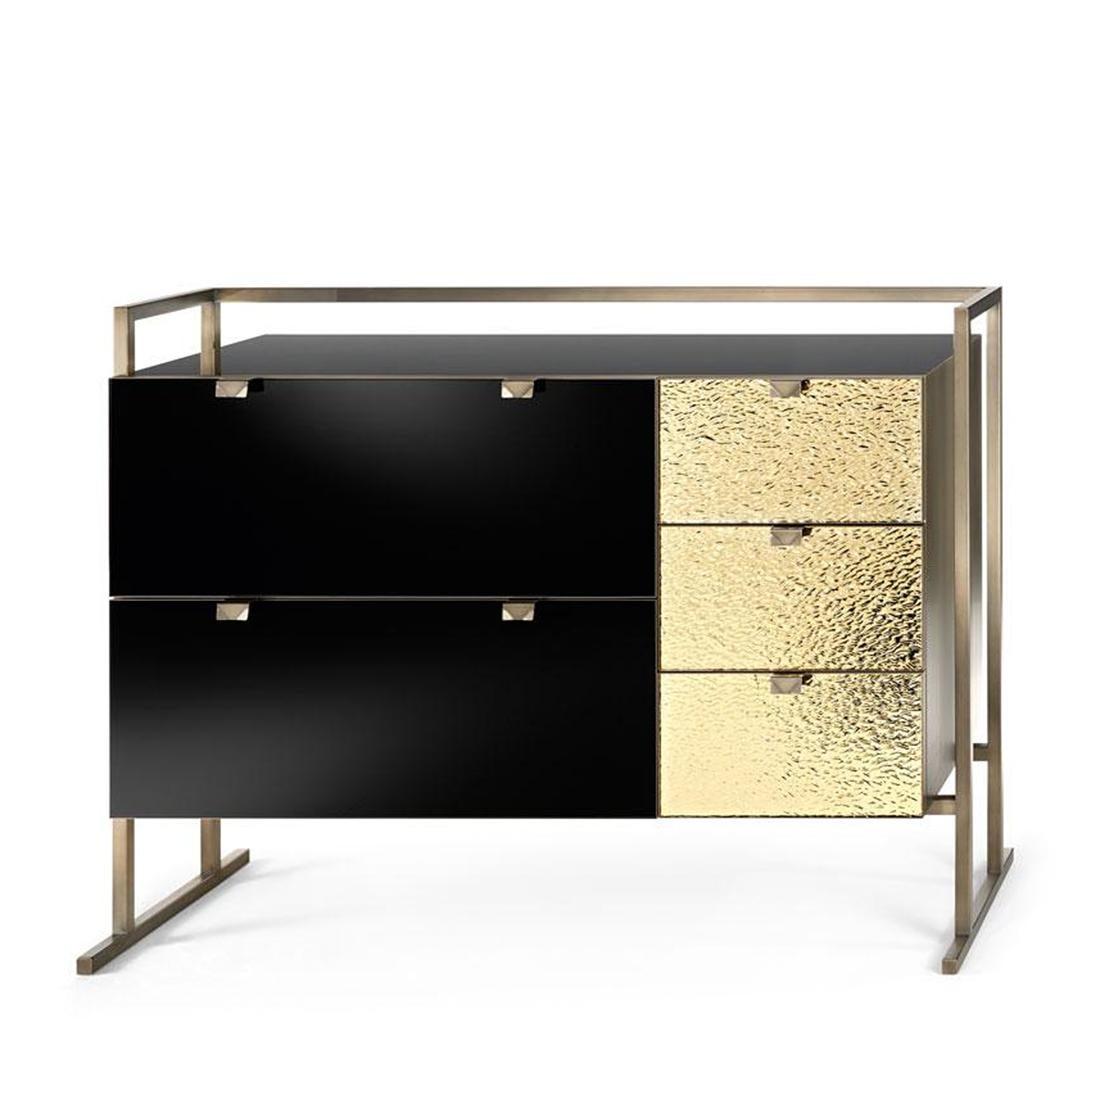 Chest of drawers Pietro with frame structure in metal
in burnished and antiqued brass finish. Structure and
inside drawers in matt varnished grey wood. Top and
2 drawers in black glass. 3 drawers in golden glass.
Sides in metal in burnished and